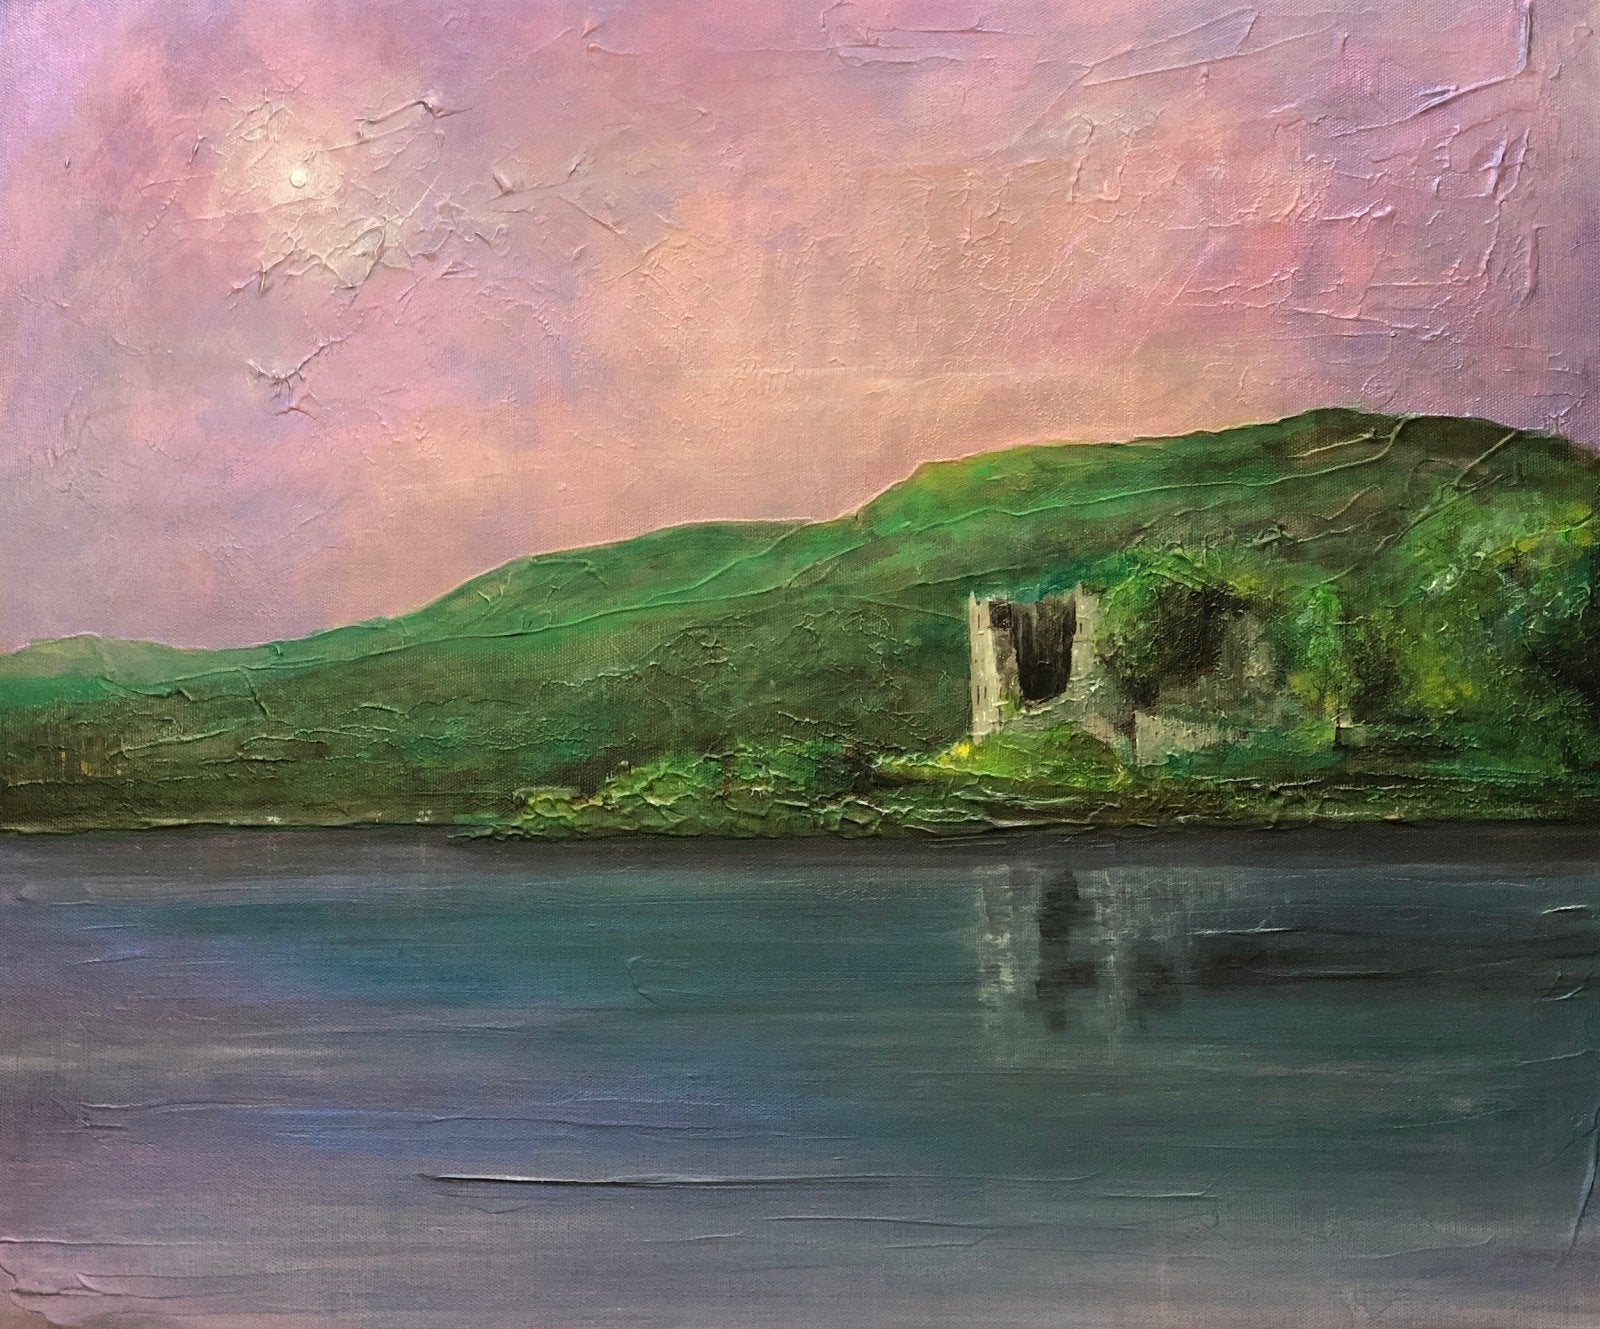 Old Castle Lachlan-Signed Art Prints By Scottish Artist Hunter-Scottish Castles Art Gallery-Paintings, Prints, Homeware, Art Gifts From Scotland By Scottish Artist Kevin Hunter